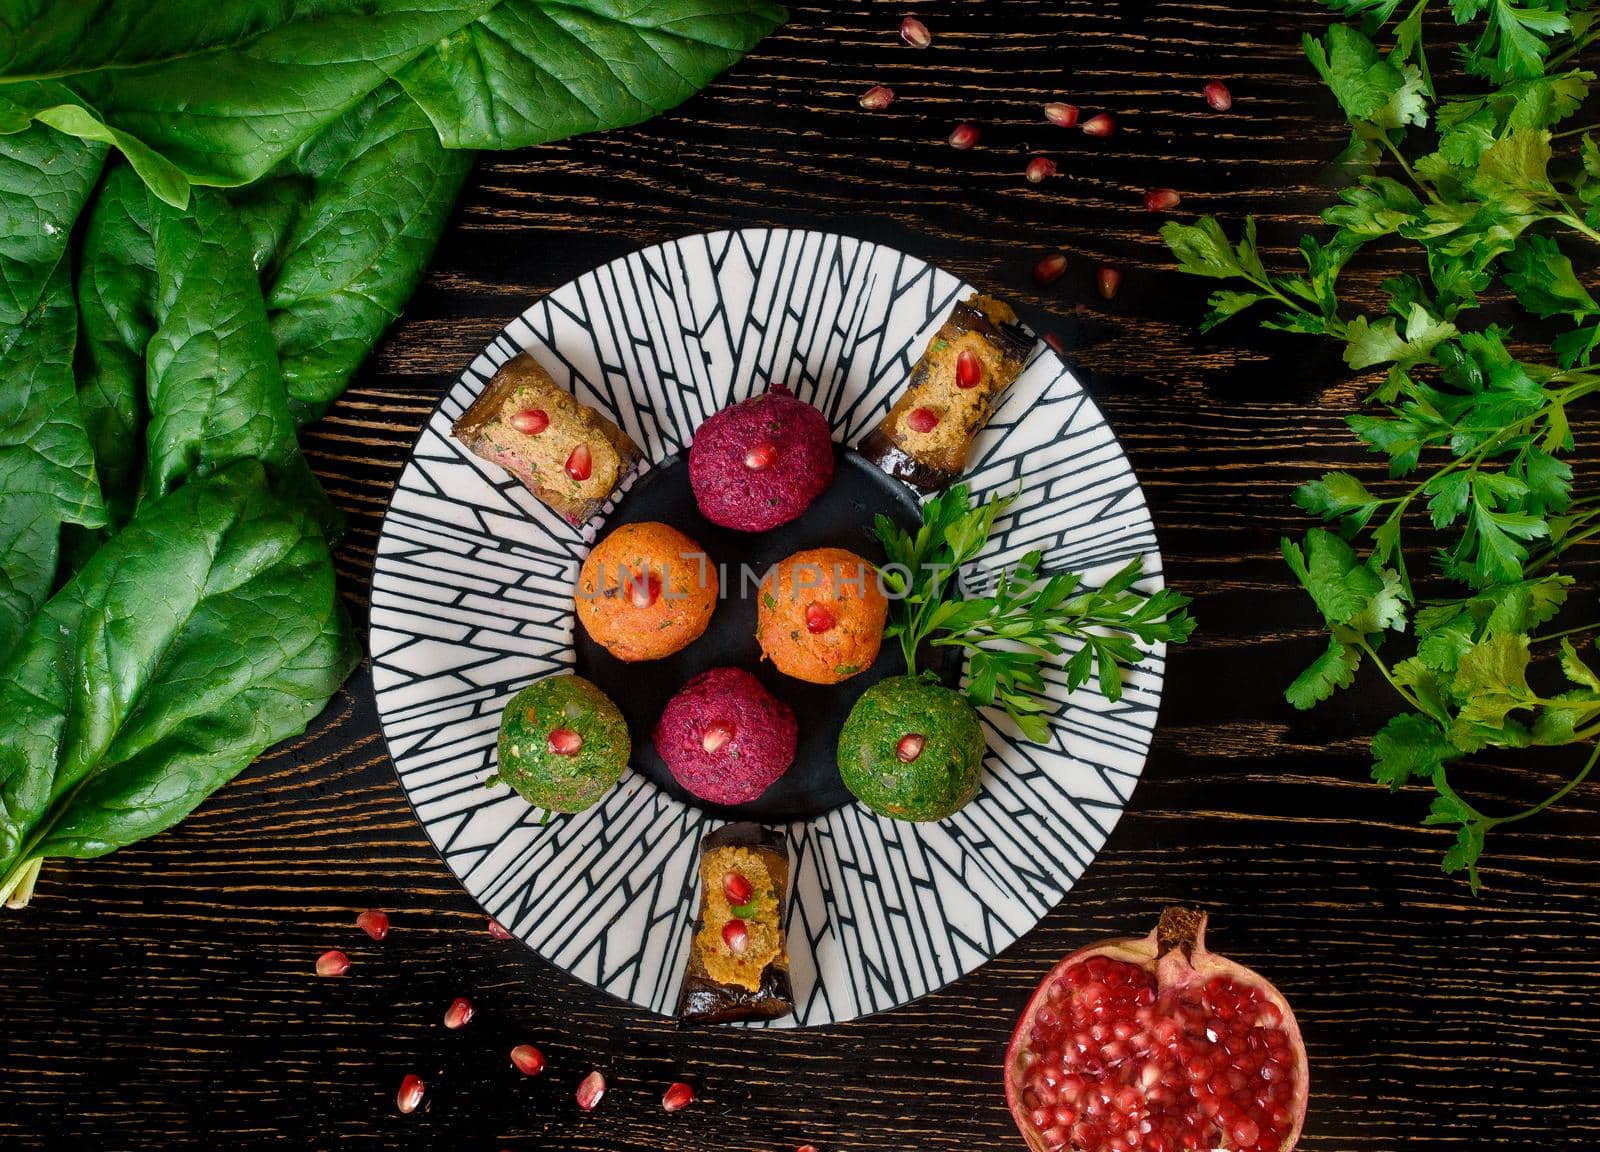 Assortment of pkhali from beets, spinach, carrots, eggplant rolls garnished with parsley and pomegranate . Georgian appetizer on a black and white plate with spinach and parsley leaves. Top view.